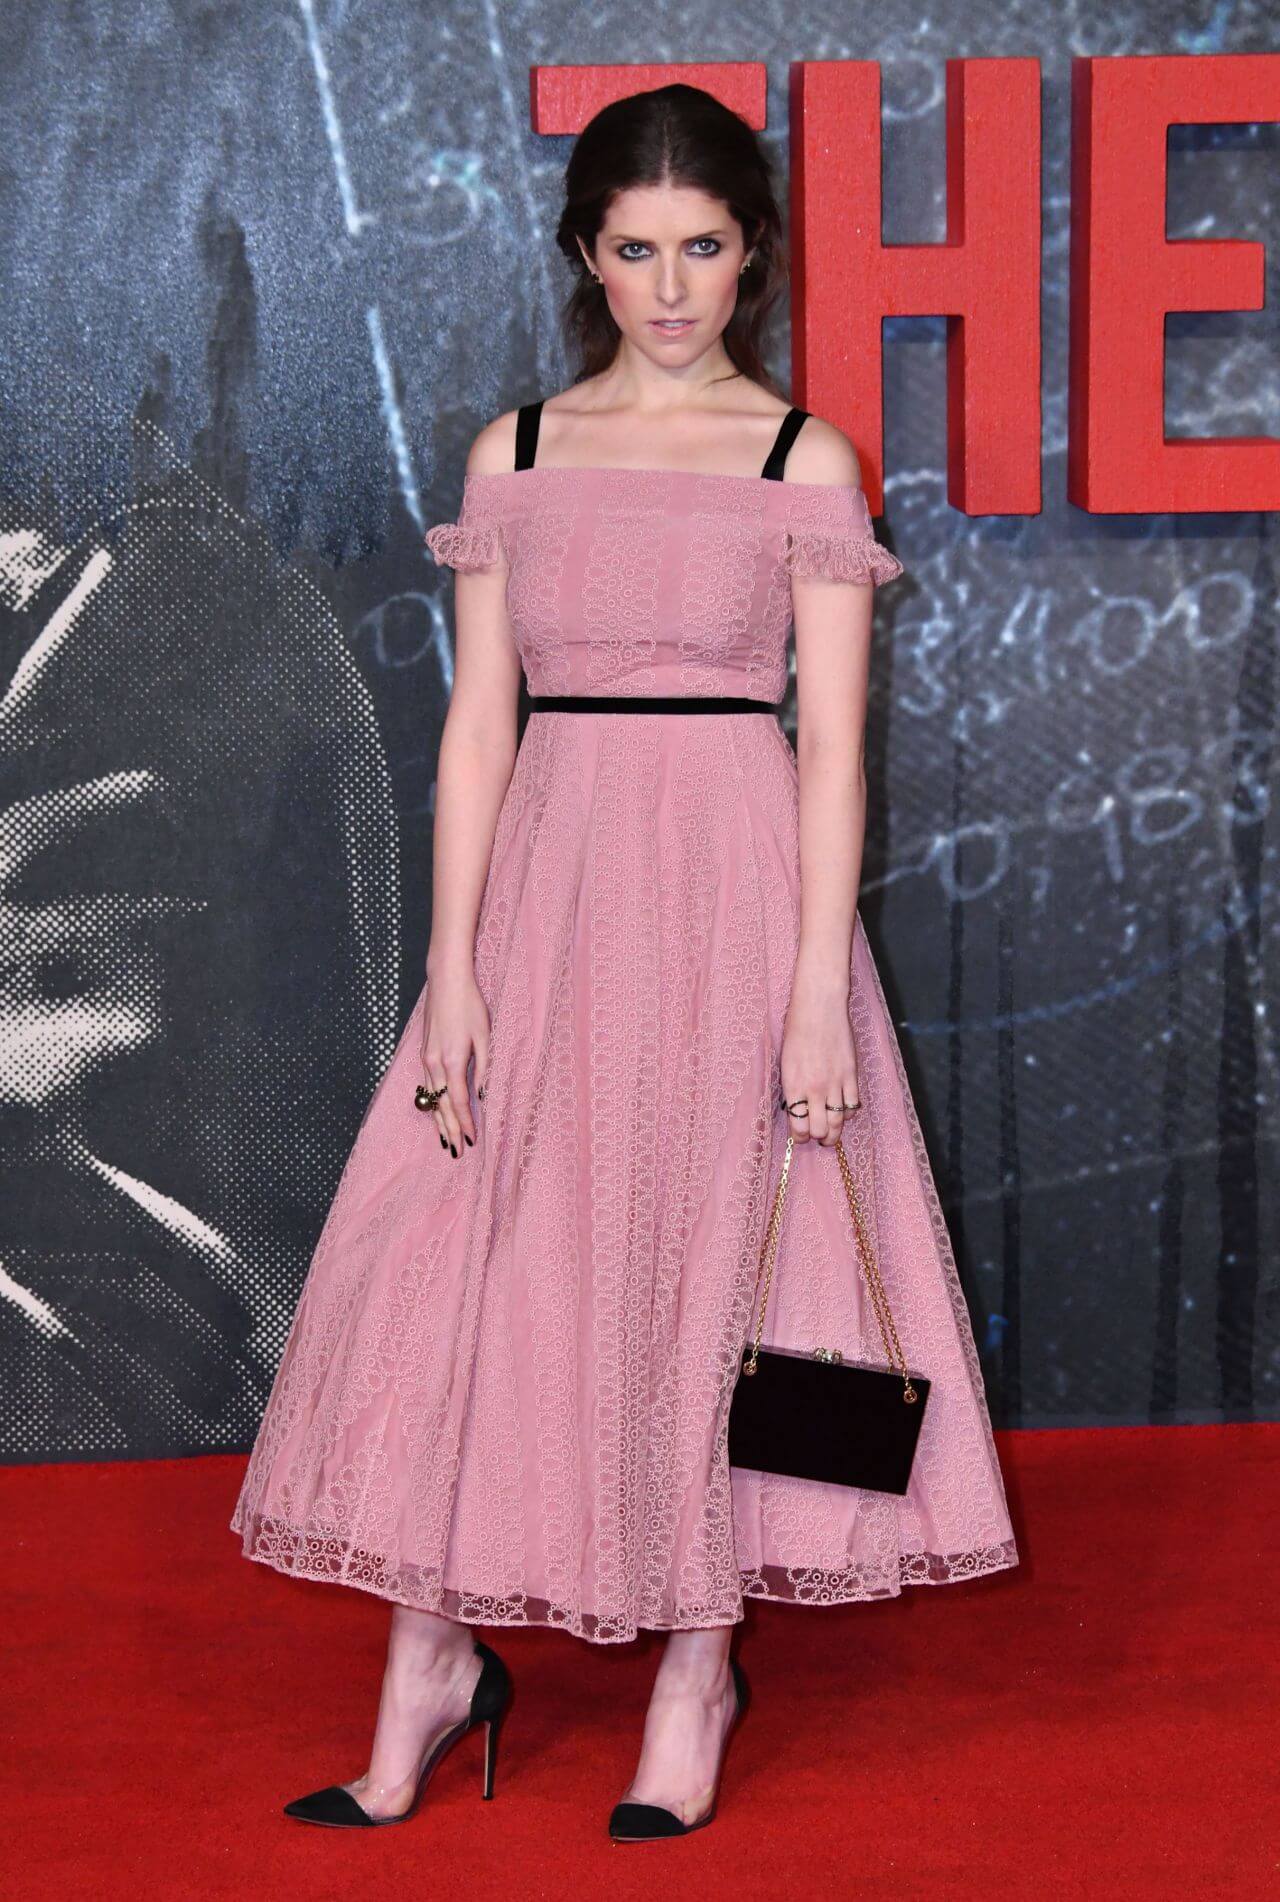 Anna Kendrick  In Dusky Pink Net Fabric Off Shoulder Long Flare Gown At ‘The Accountant’ Premiere in London